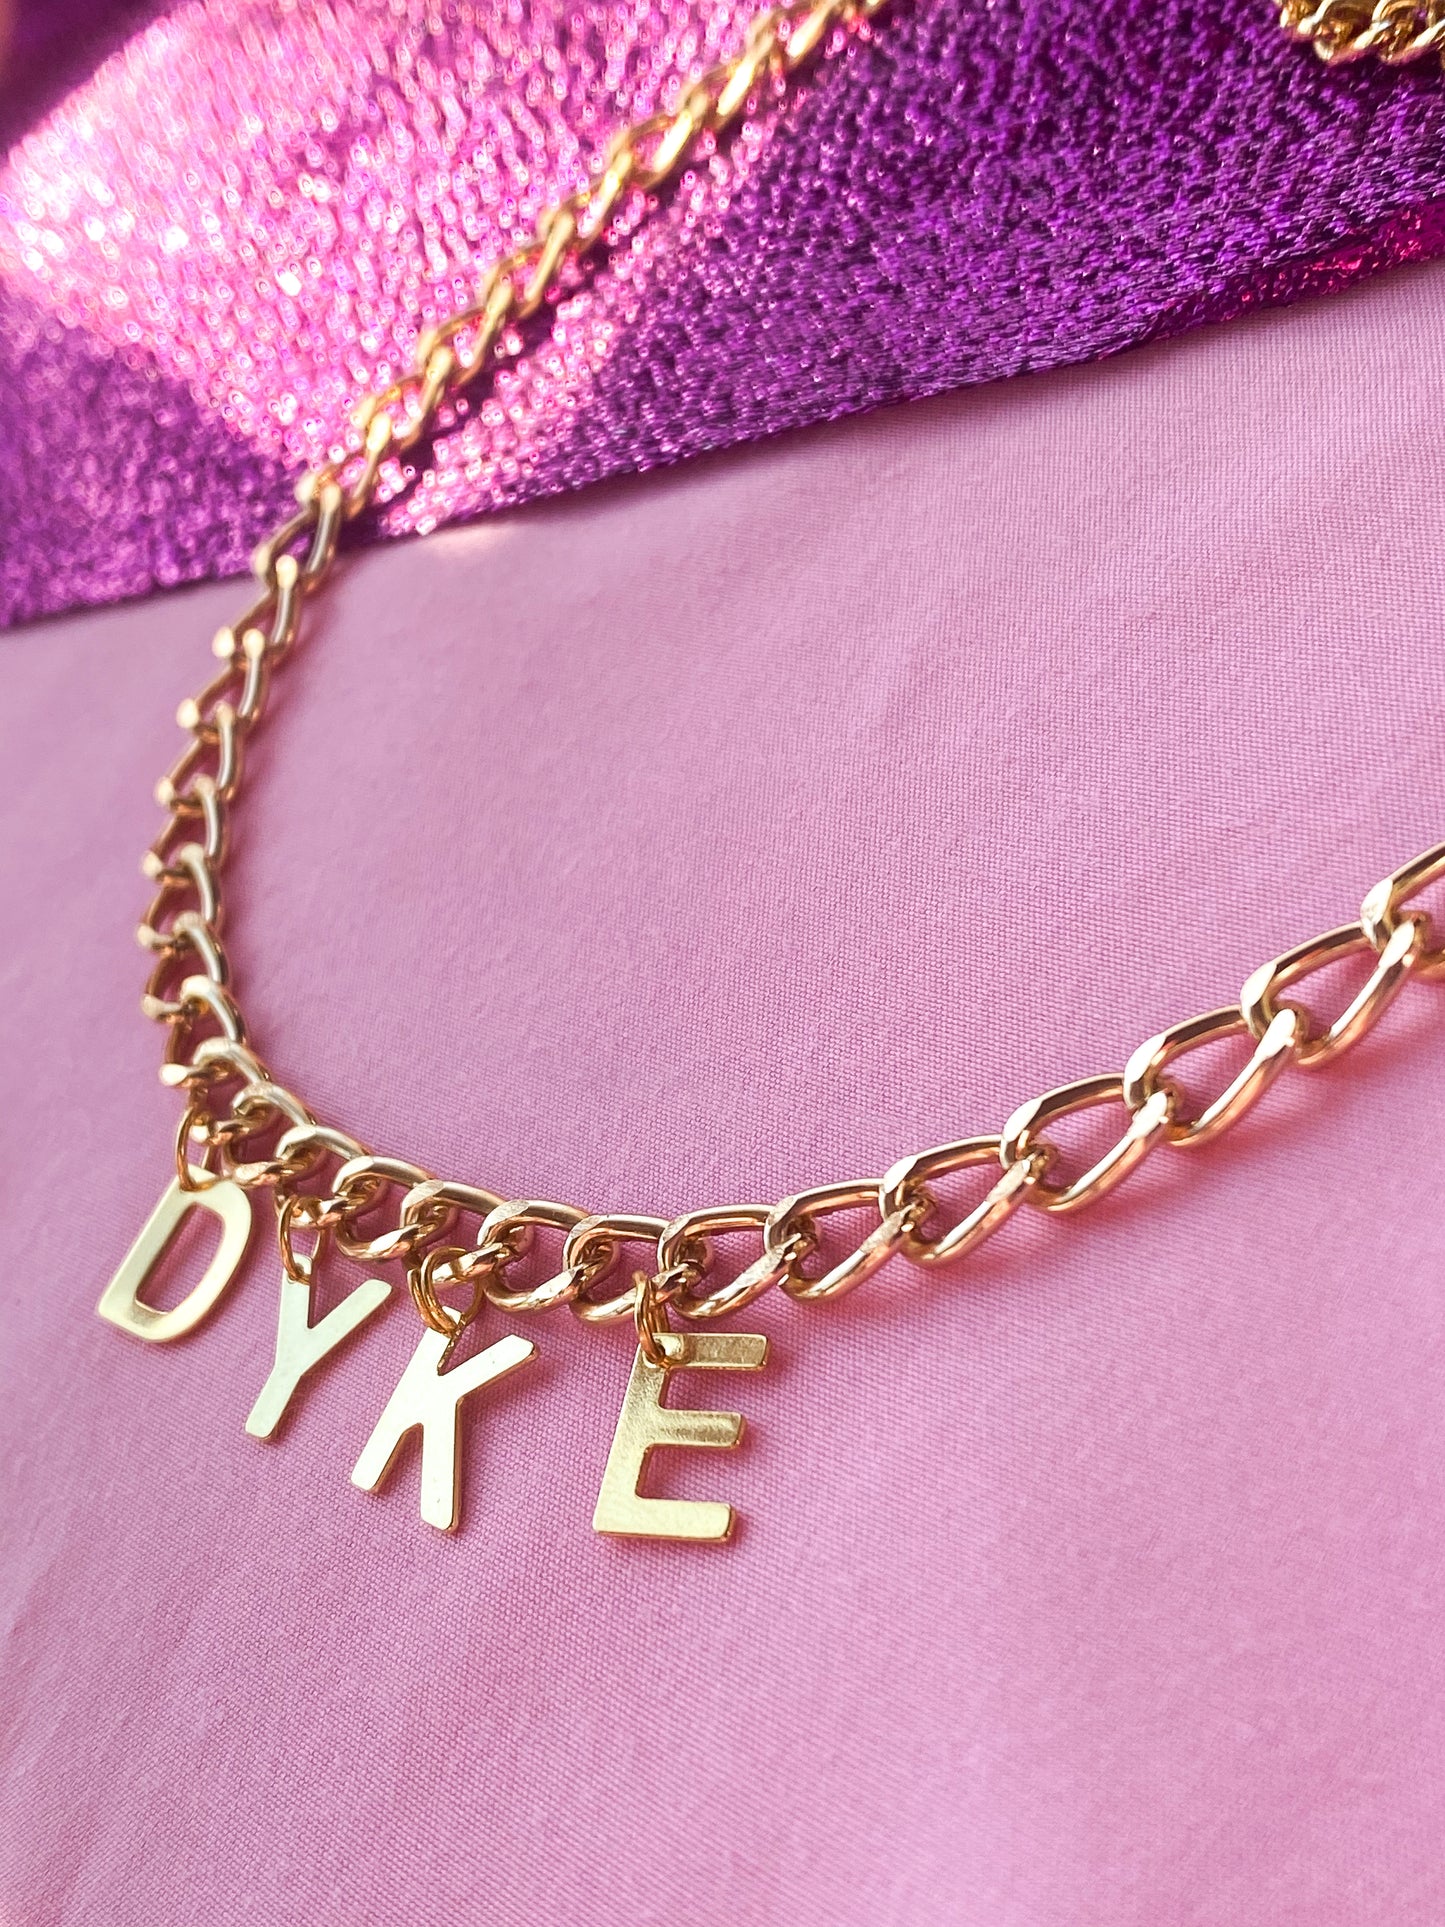 DYKE gold colour letter charm necklace